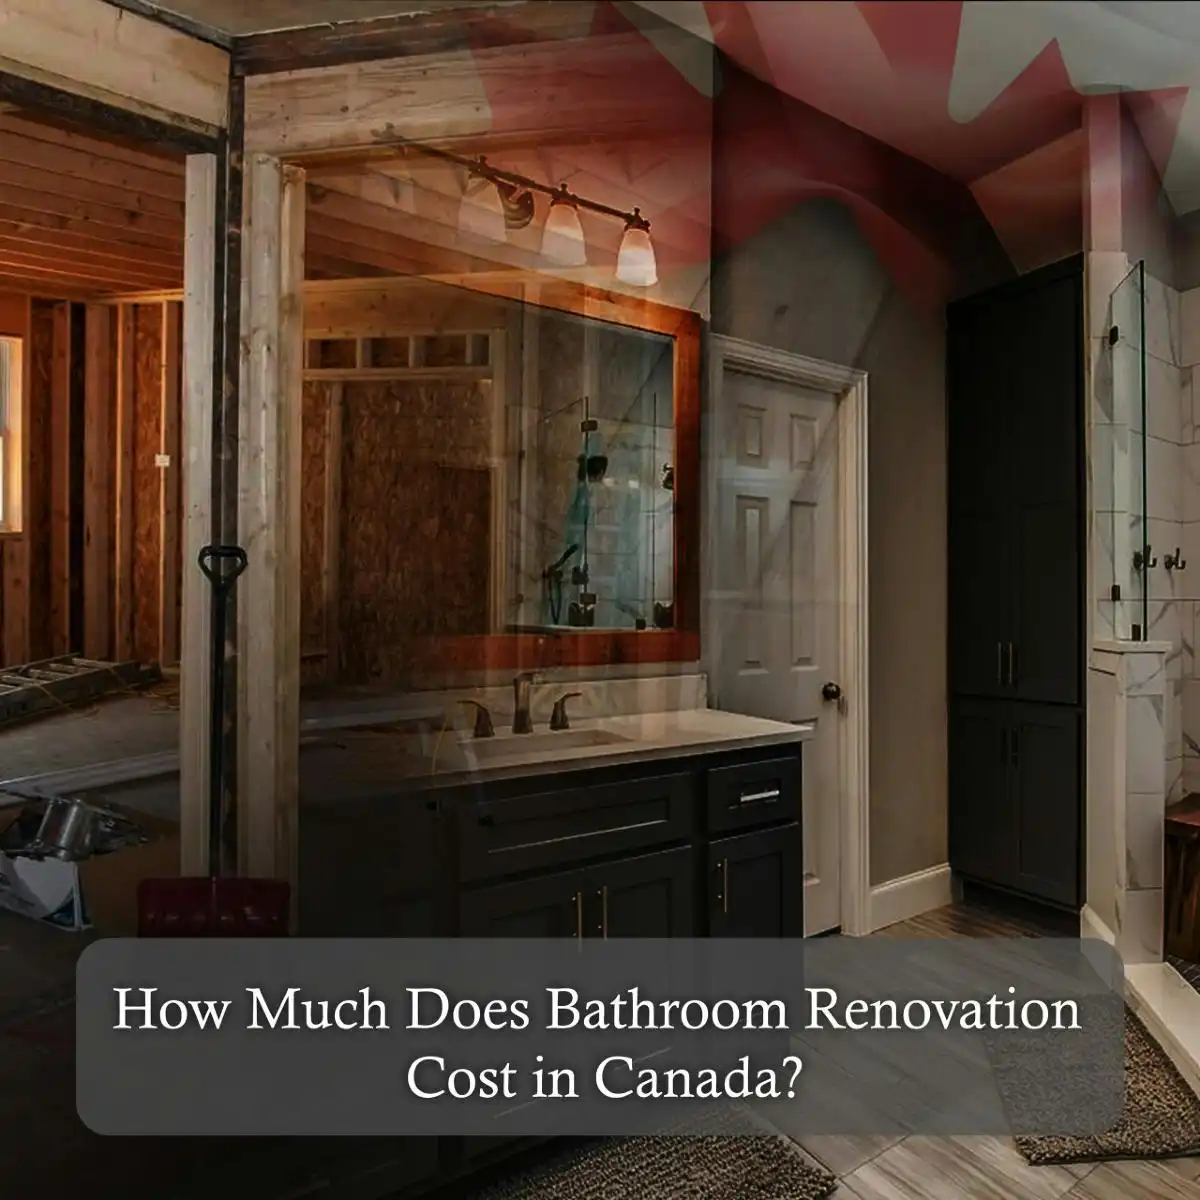 How Much Does Bathroom Renovation Cost in Canada?